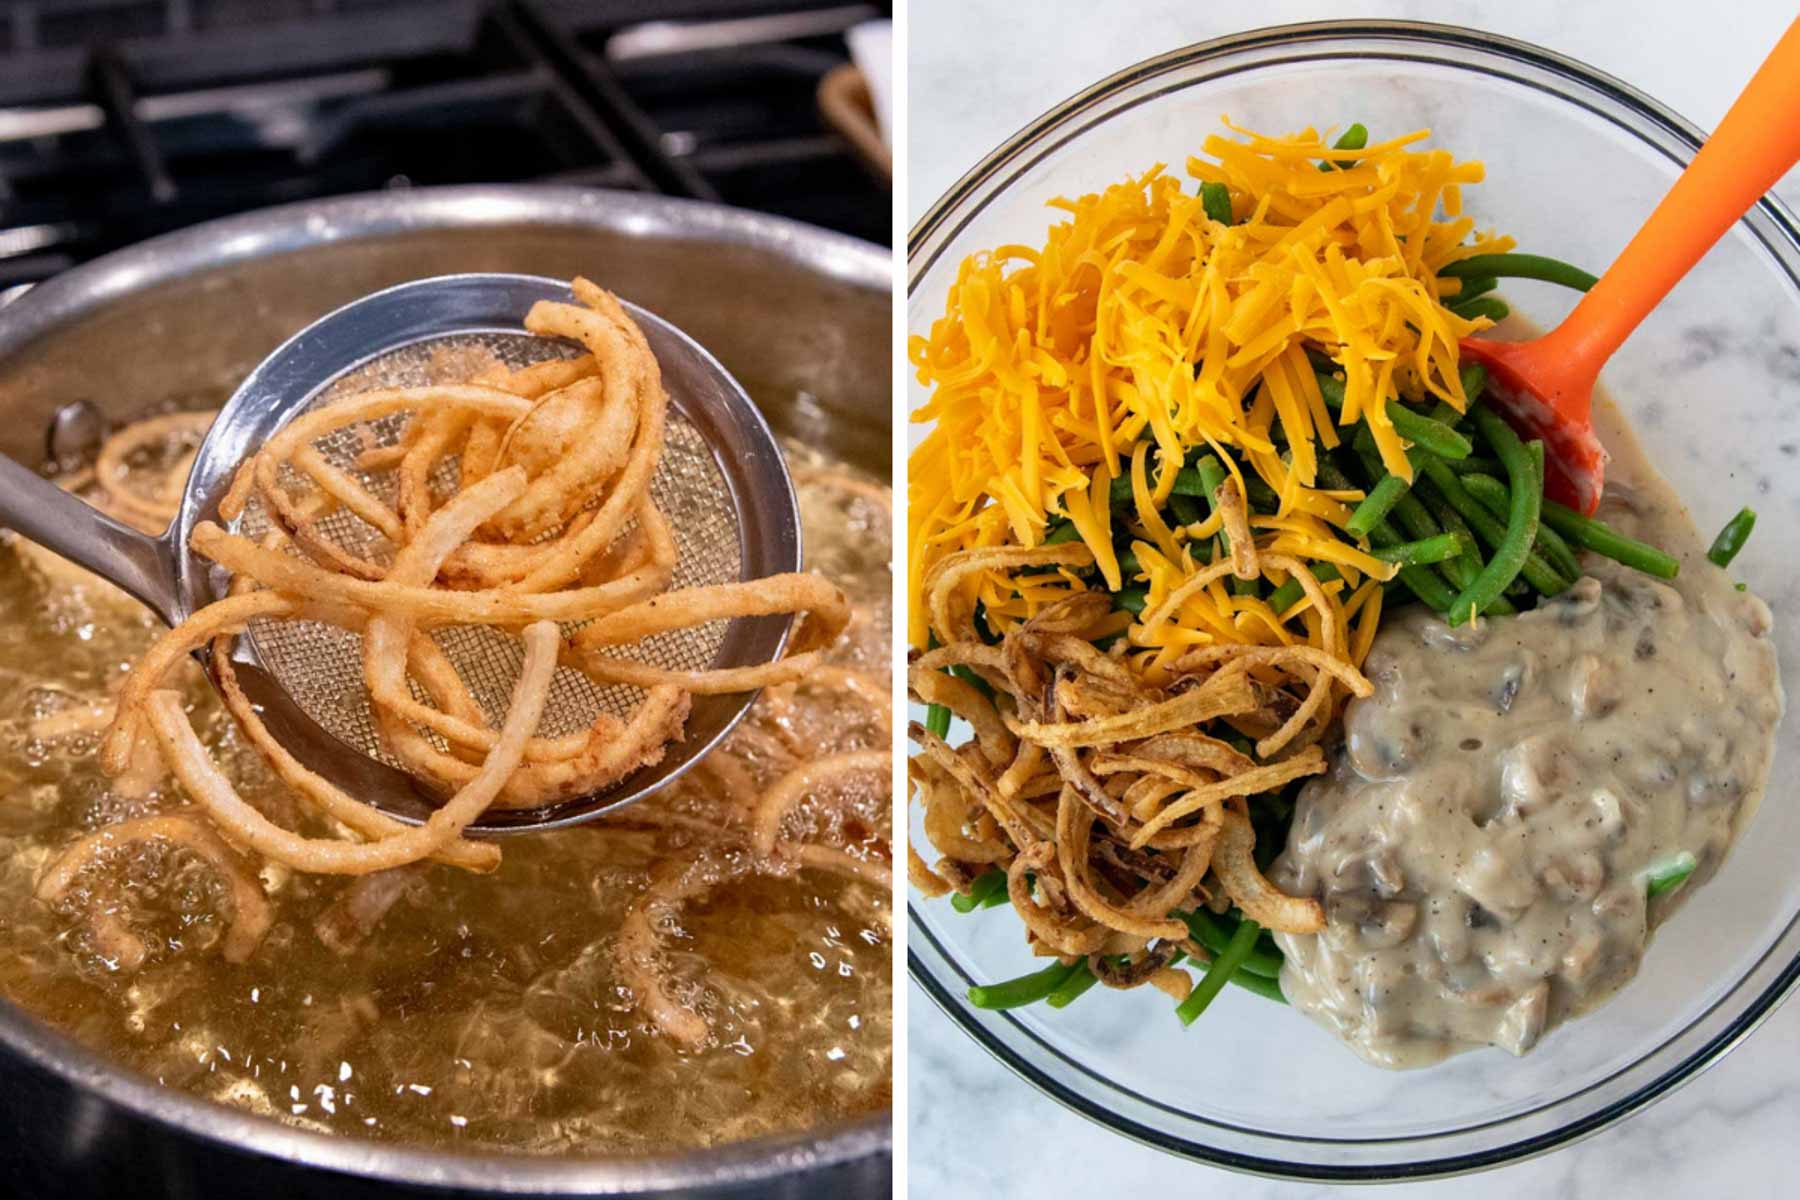 images showing fried onions and mixing together green bean casserole